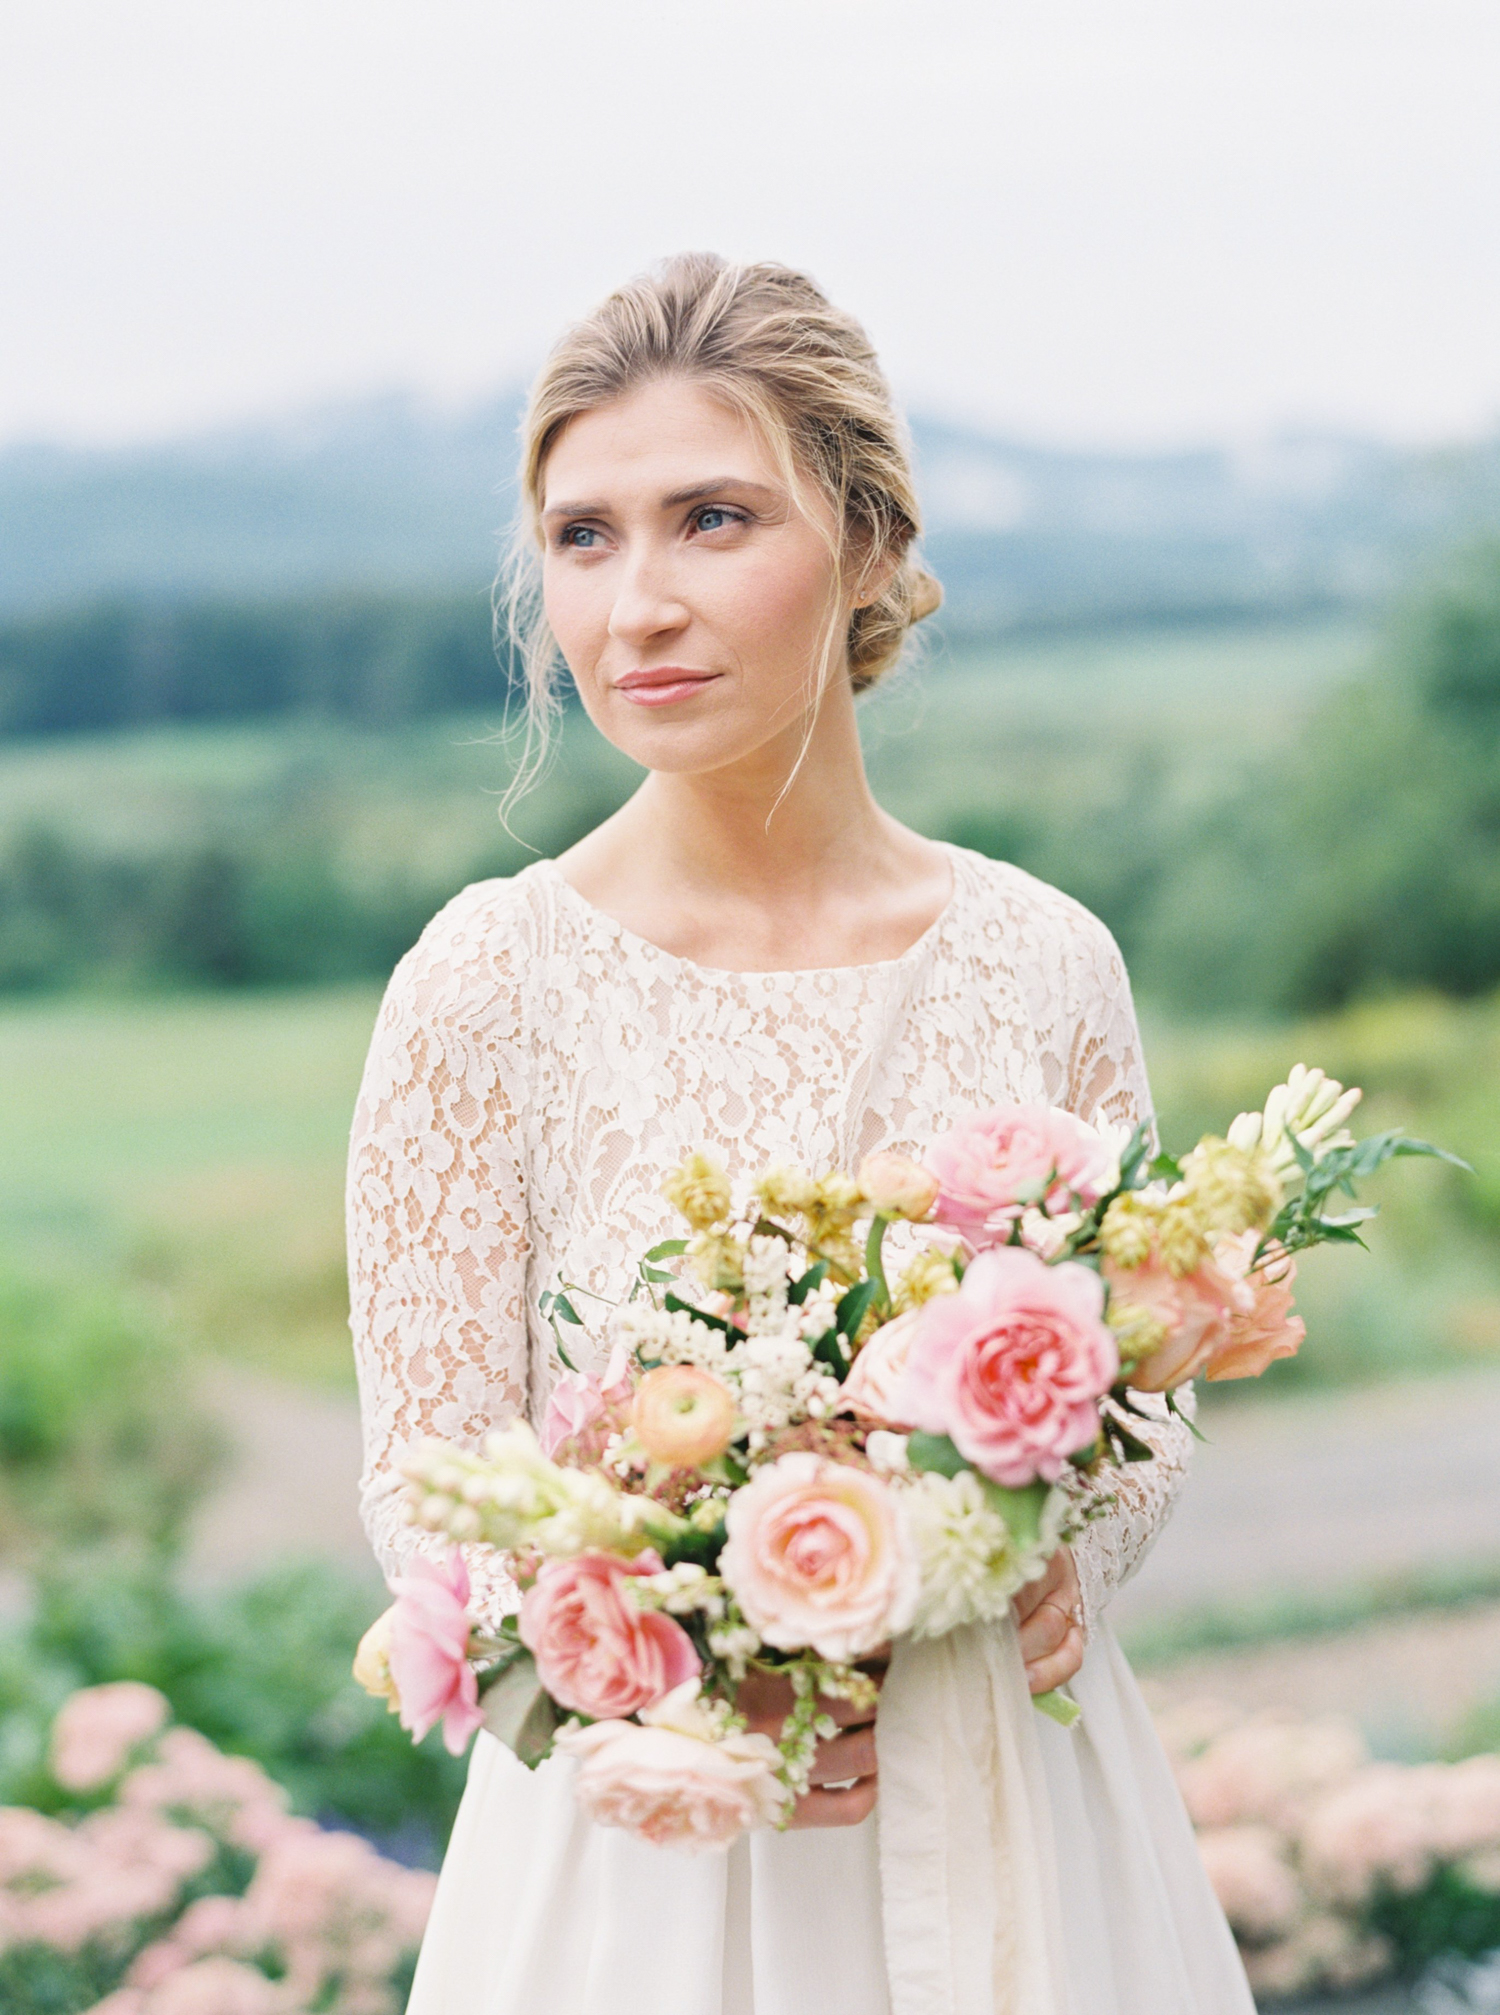 Pippin Hill Wedding Photos | Molly Carr Photography | Lauren Emerson Events | Pippin Hill Farm & Vineyard | Rime Arodaky Bride | Bride with Hair Up | Long Sleeve Lace Wedding Dress 